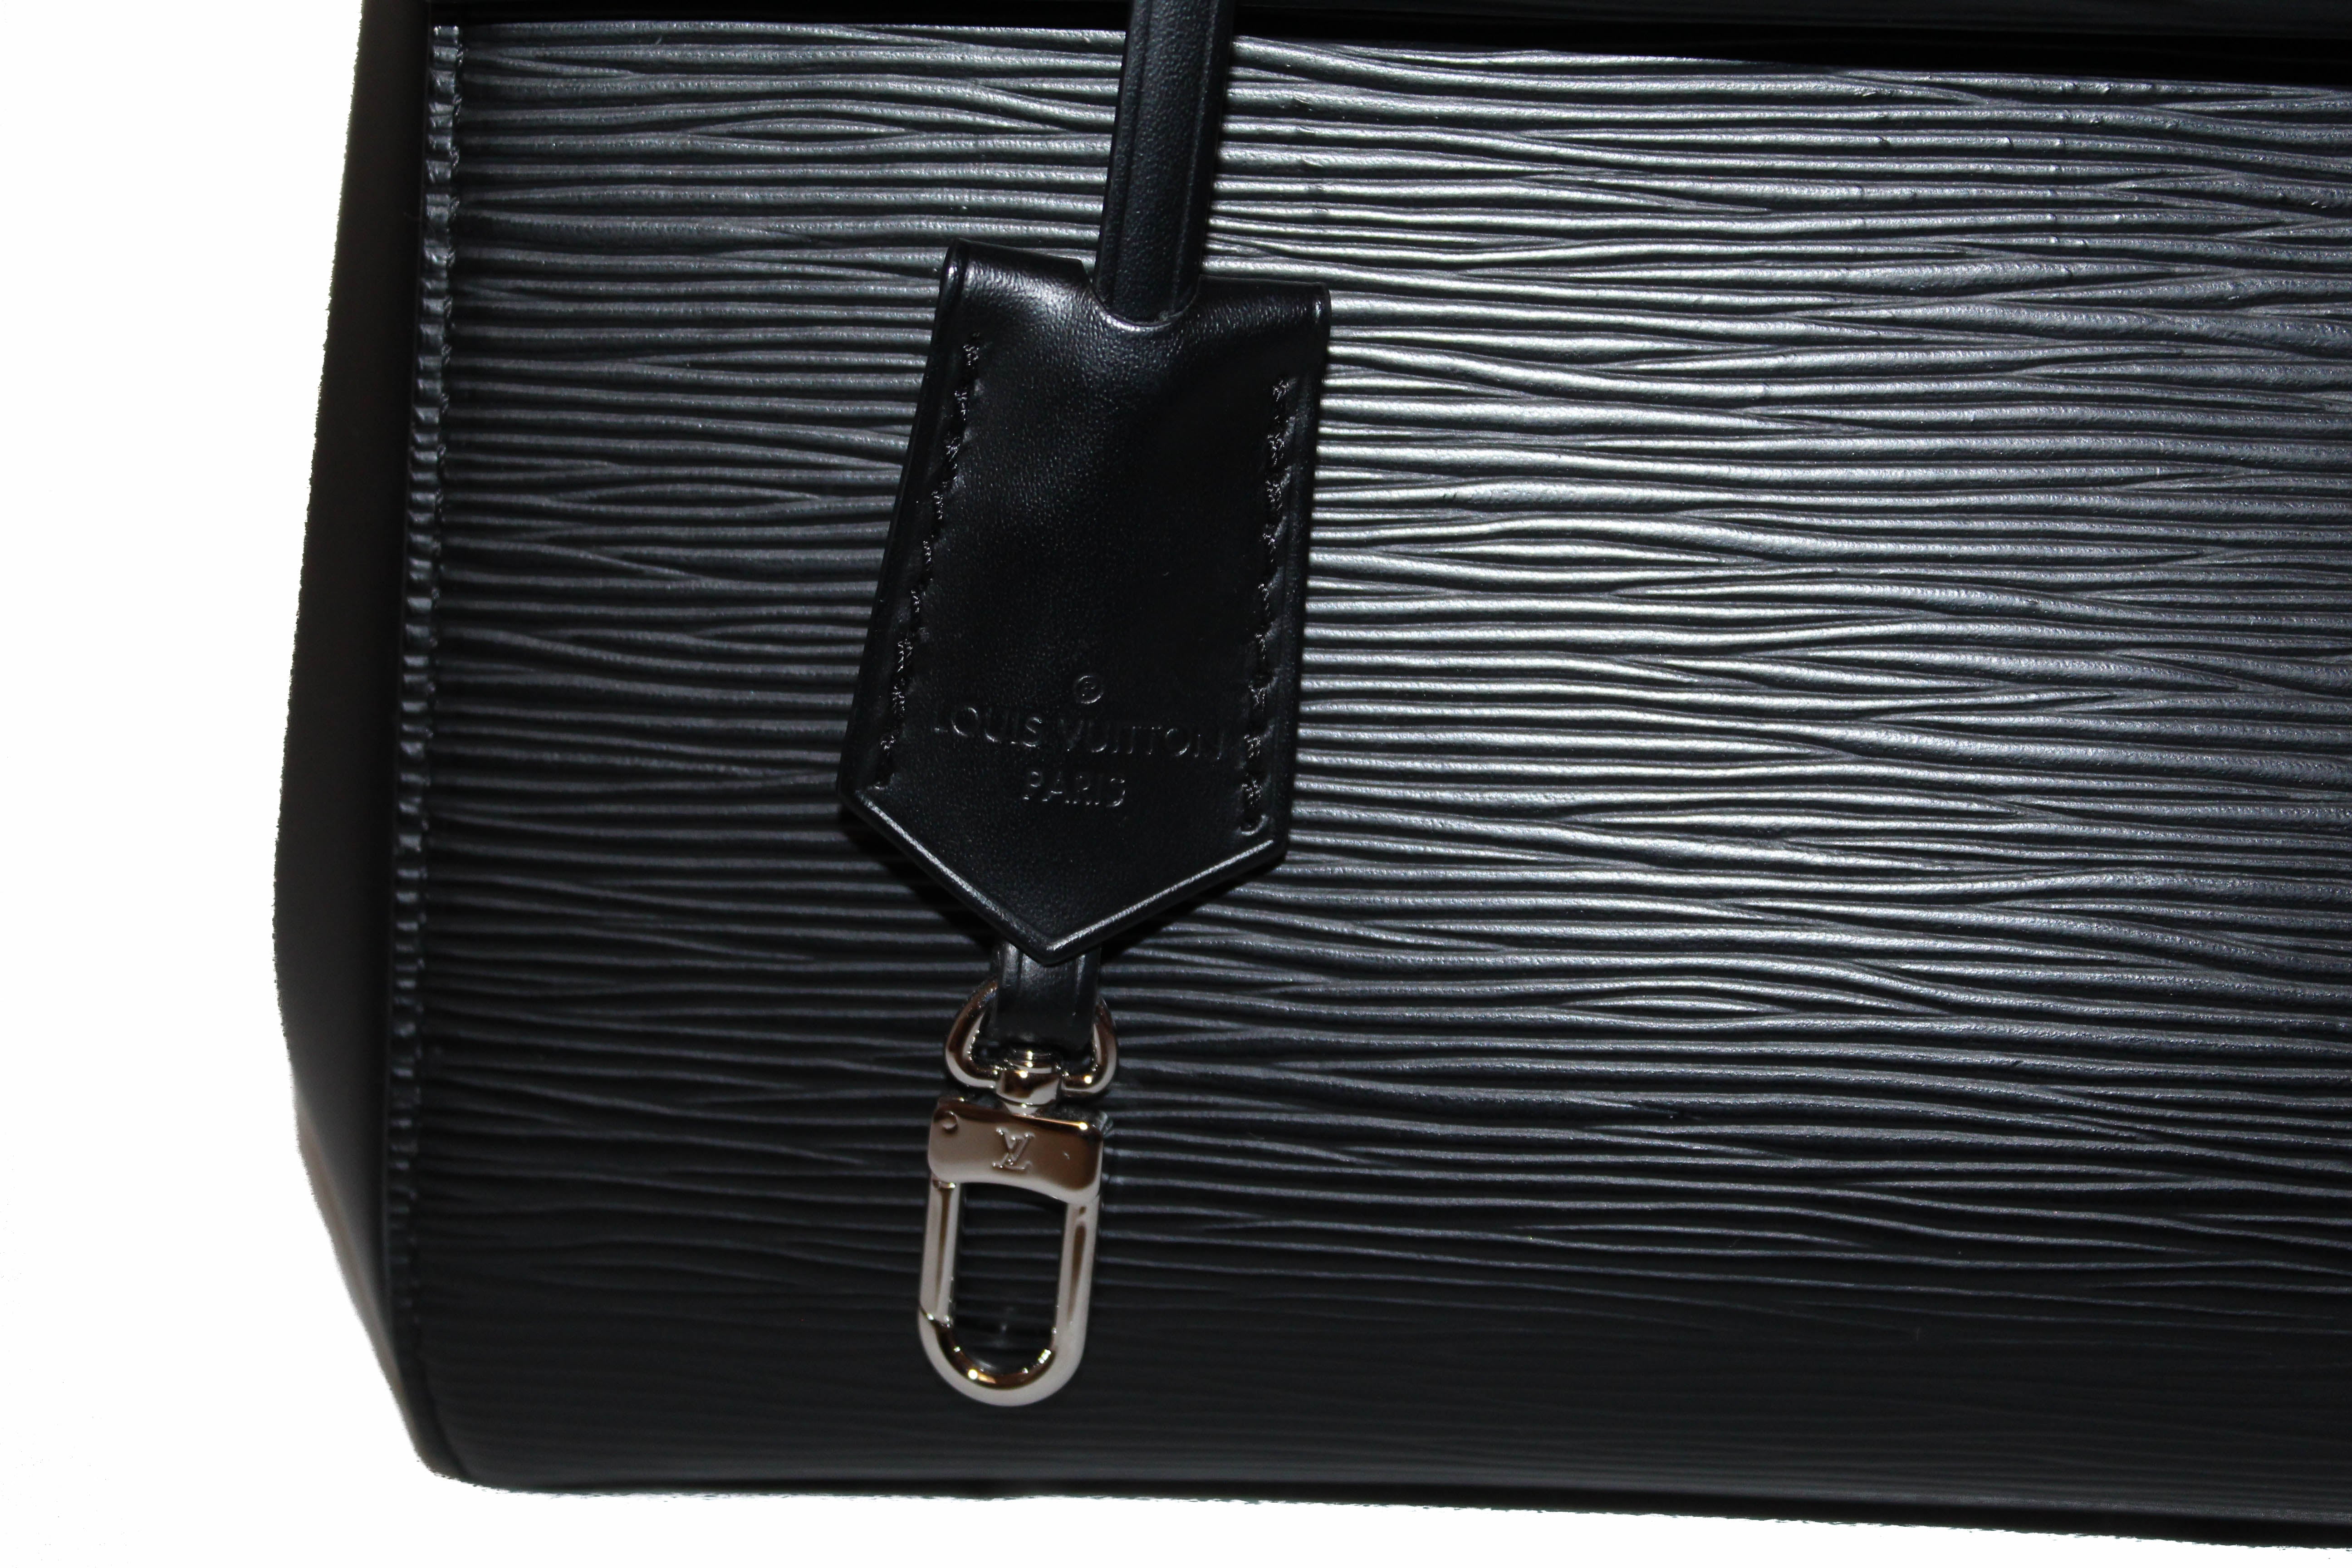 LOUIS VUITTON 'Cluny' MM Bag in Black Epi Leather